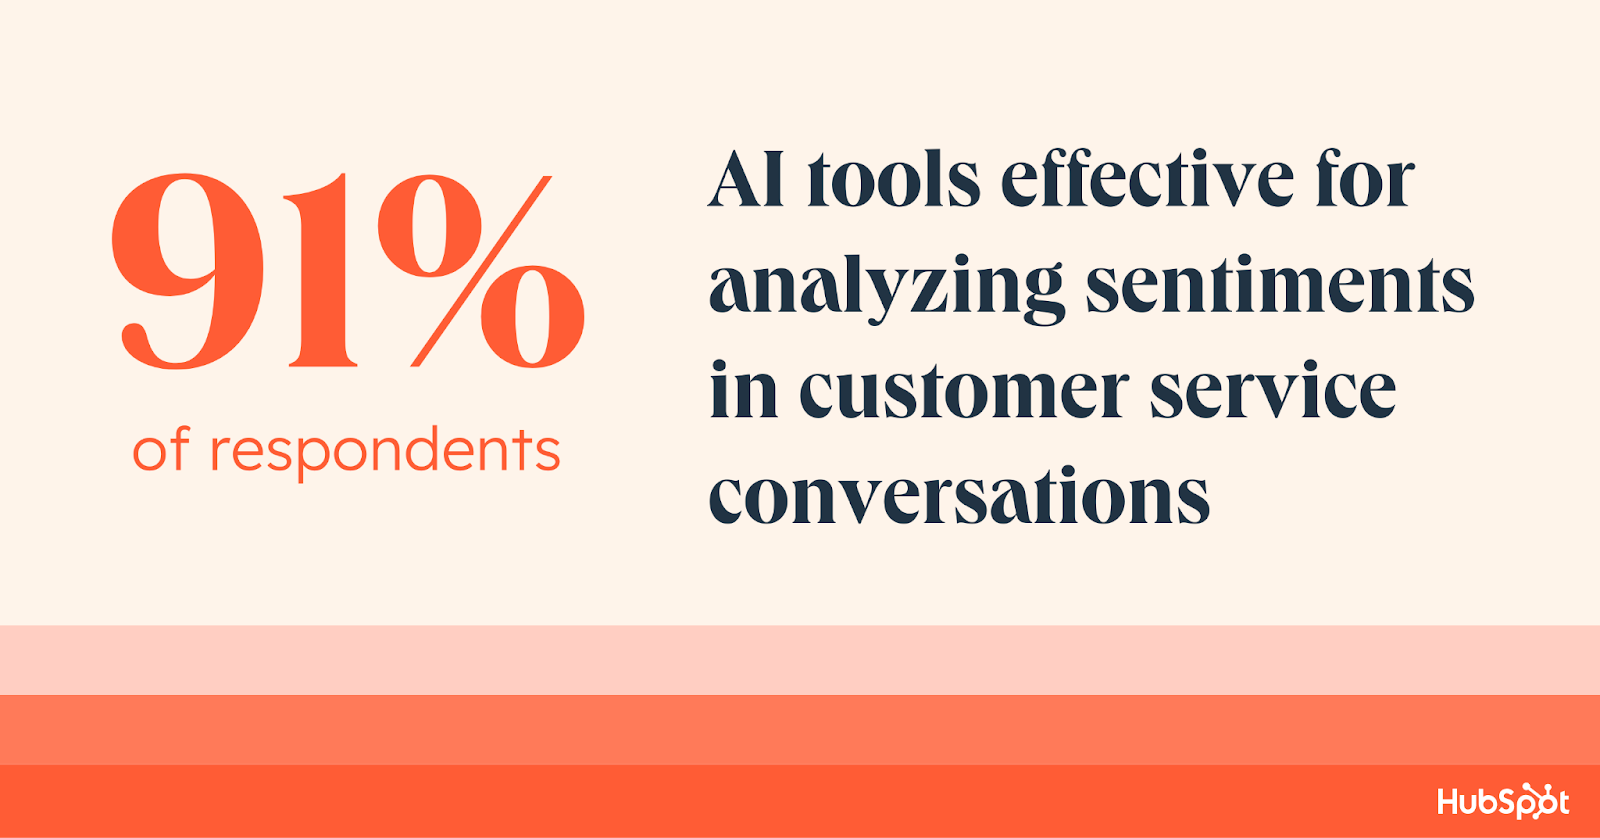 graphic showing statistic around AI tools for customer service